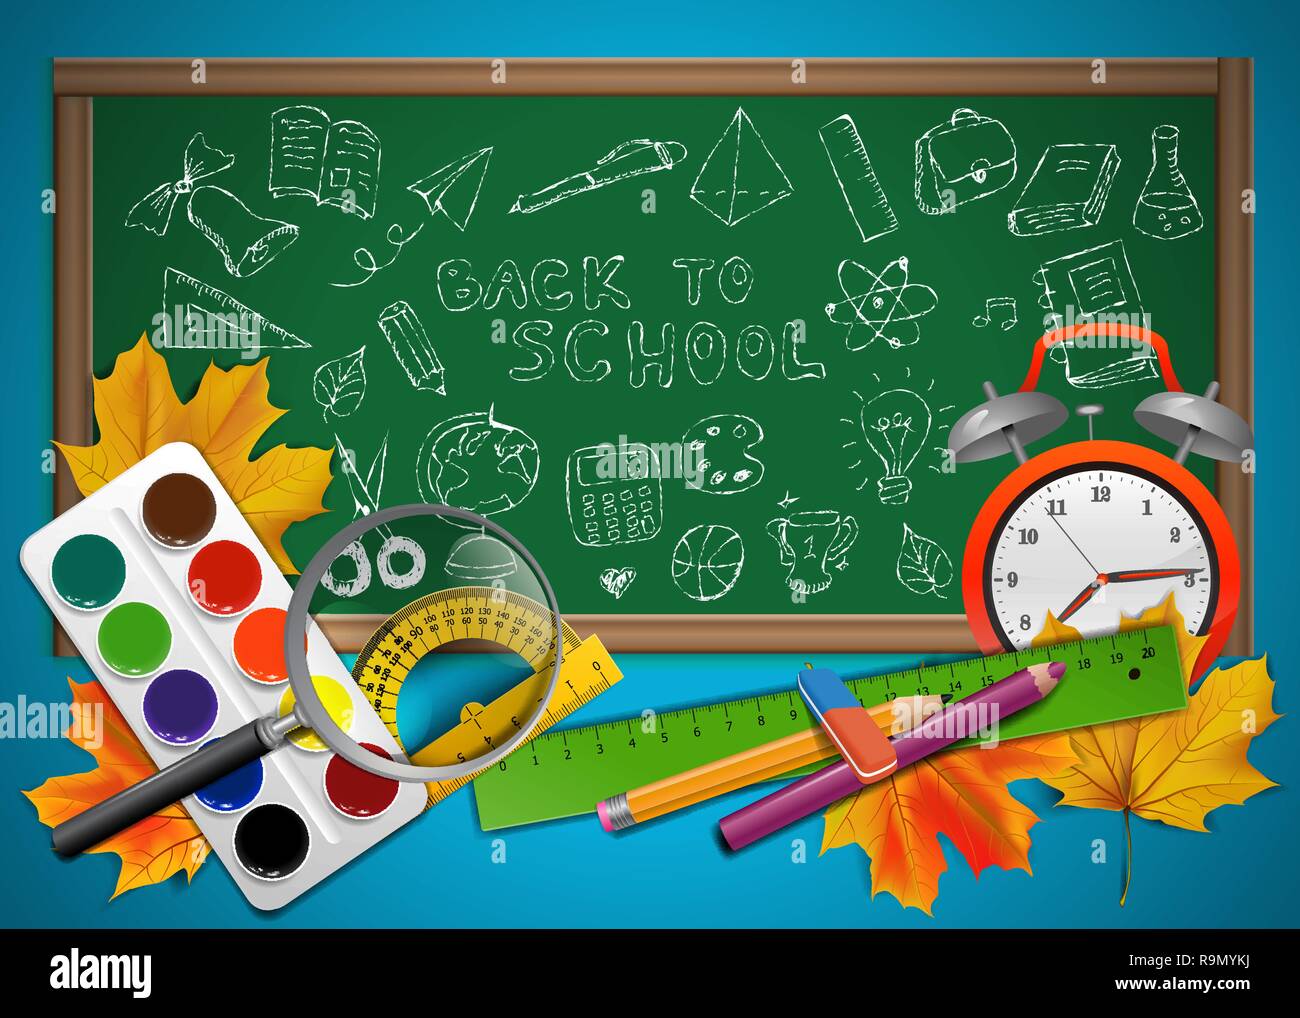 Back to school illustration with sketch school objects drawn on the blackboard Stock Vector